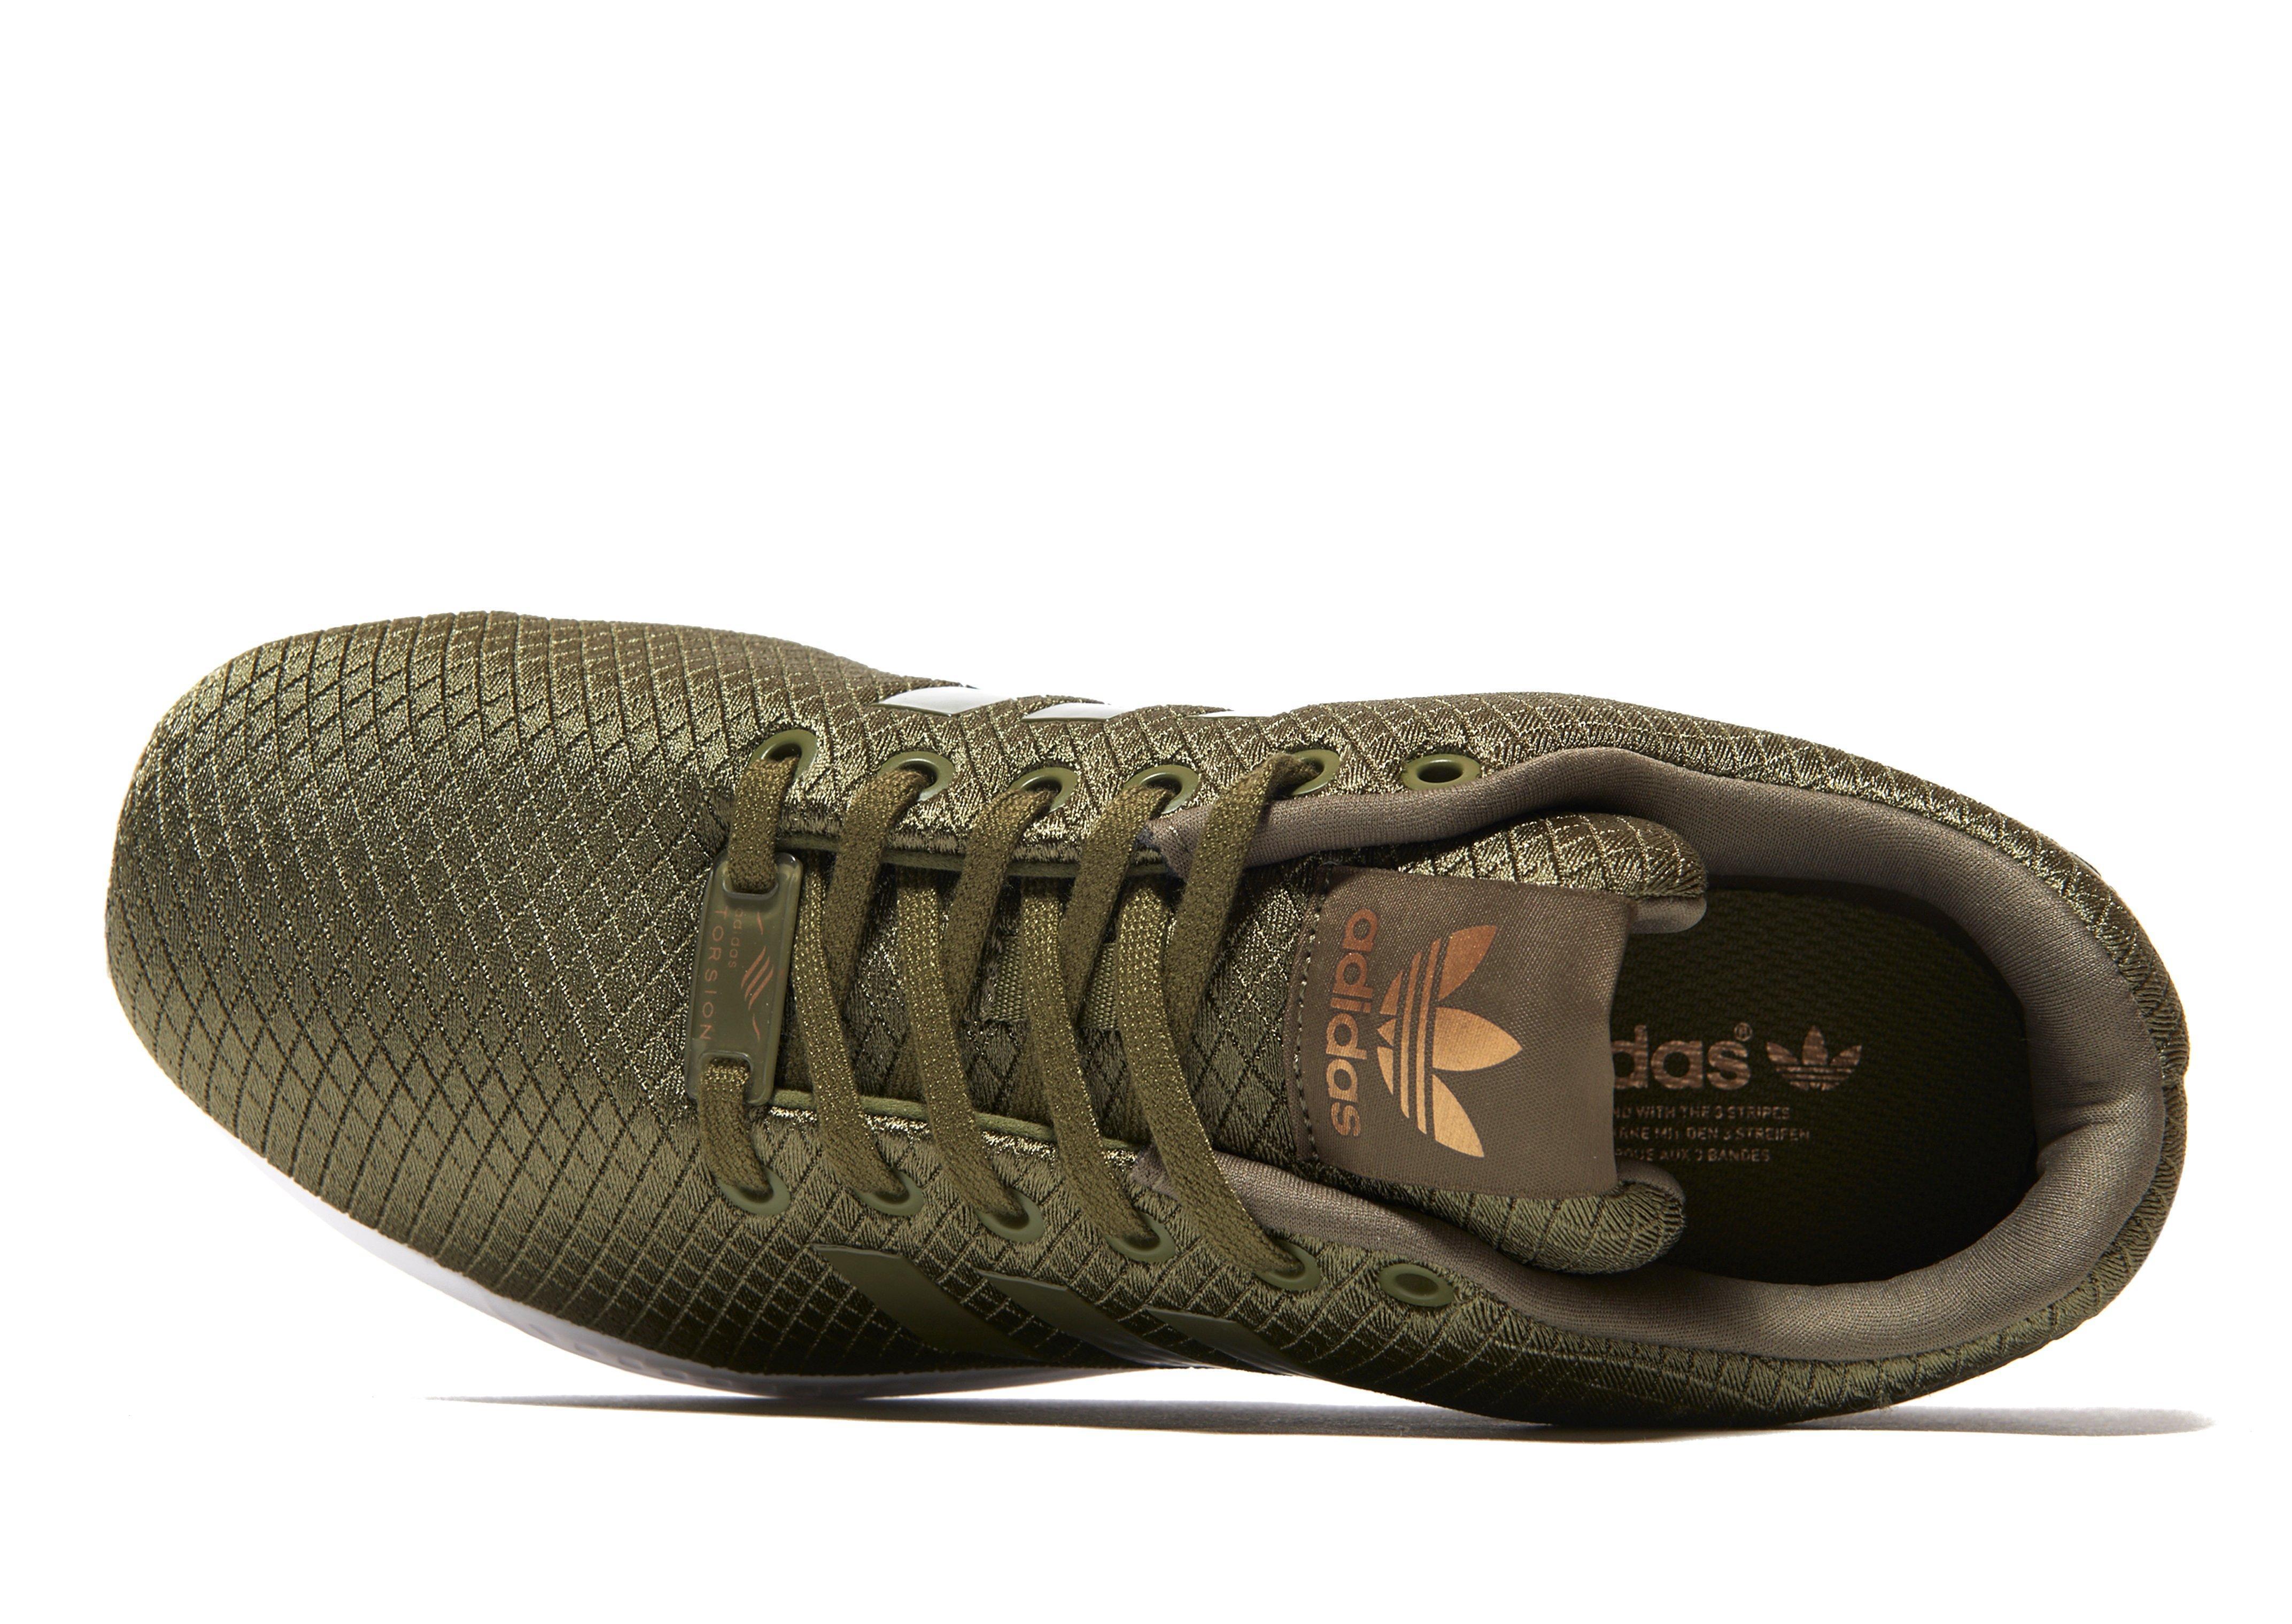 zx flux olive green